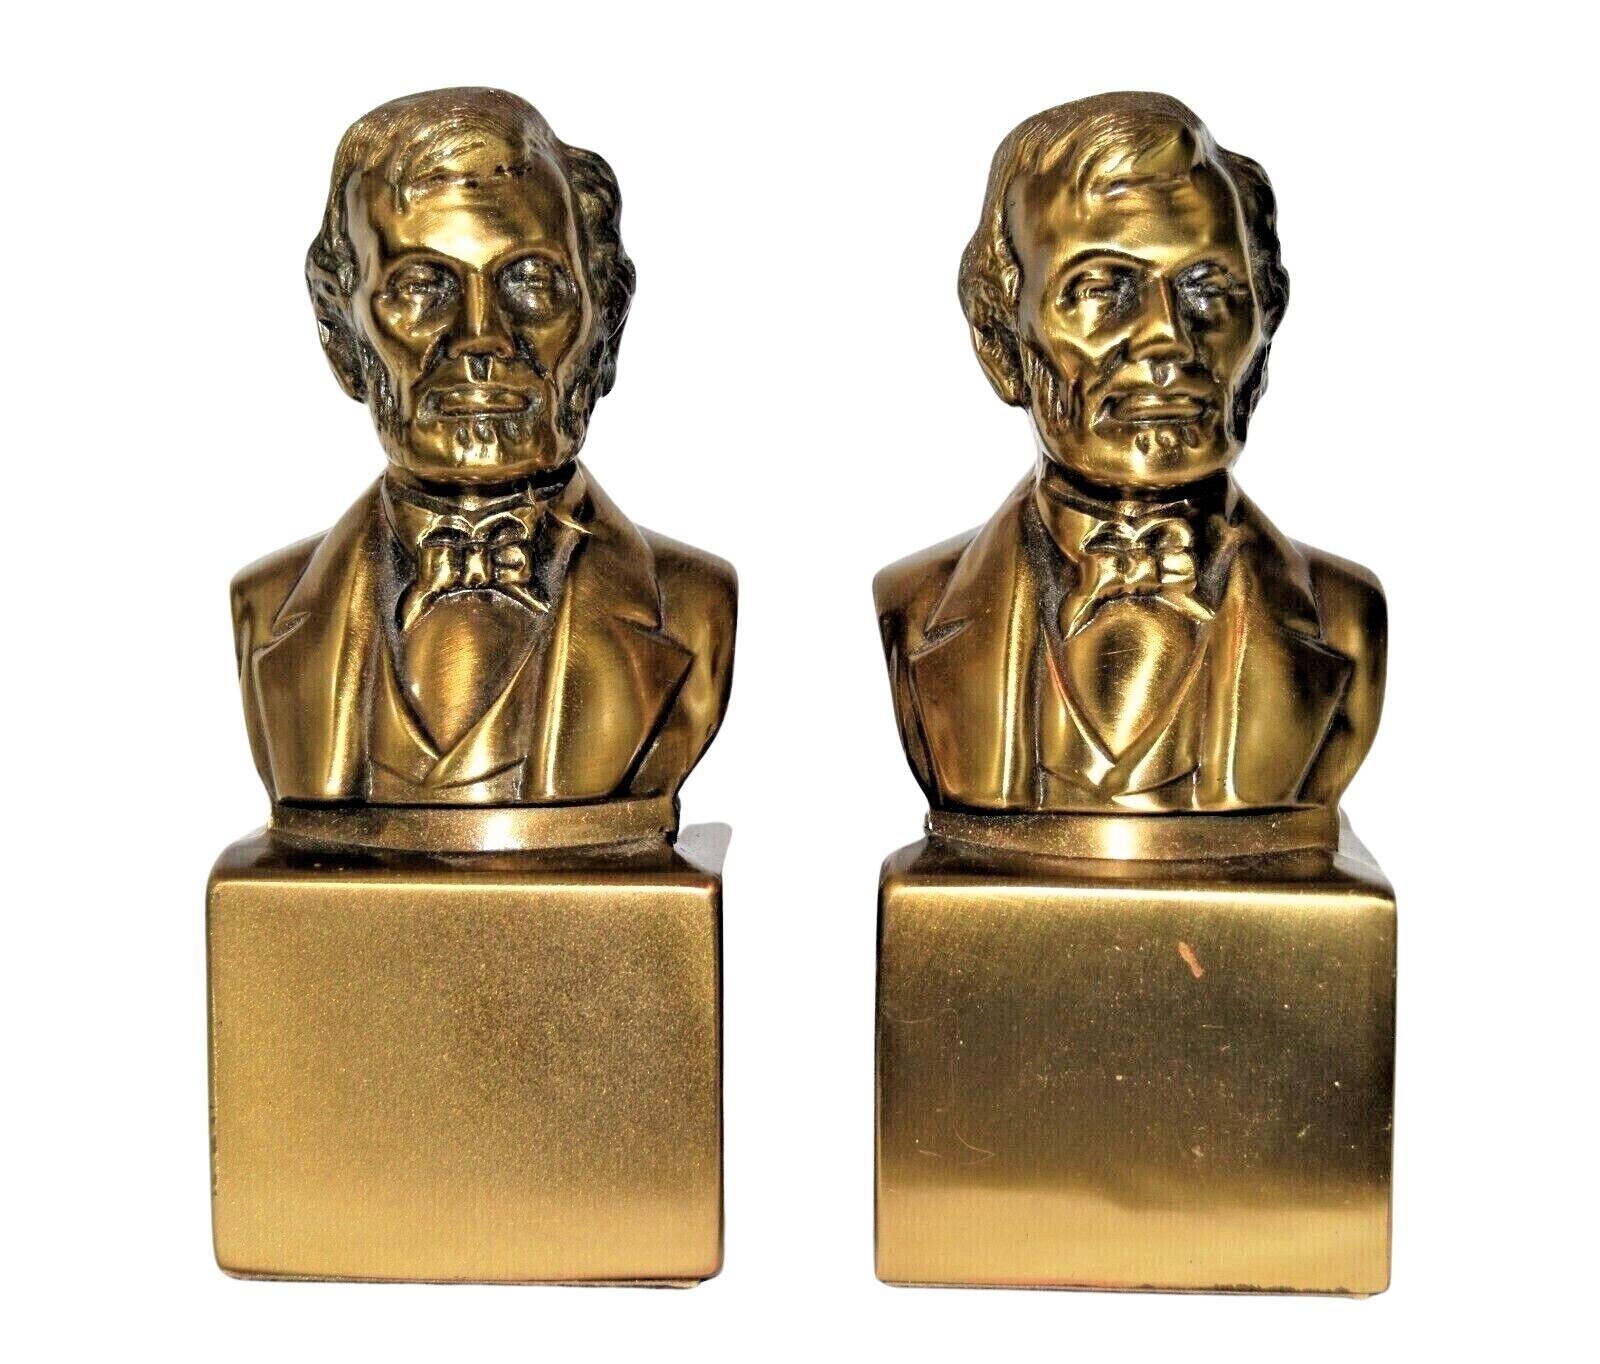 This is a pair of vintage Abraham Lincoln bust bookends. These bookends are made of brass and were produced by PM Craftsman in the U.S. On the base is a PM Craftsman label. The bookends depict President Abraham Lincoln, from head to shoulders, atop